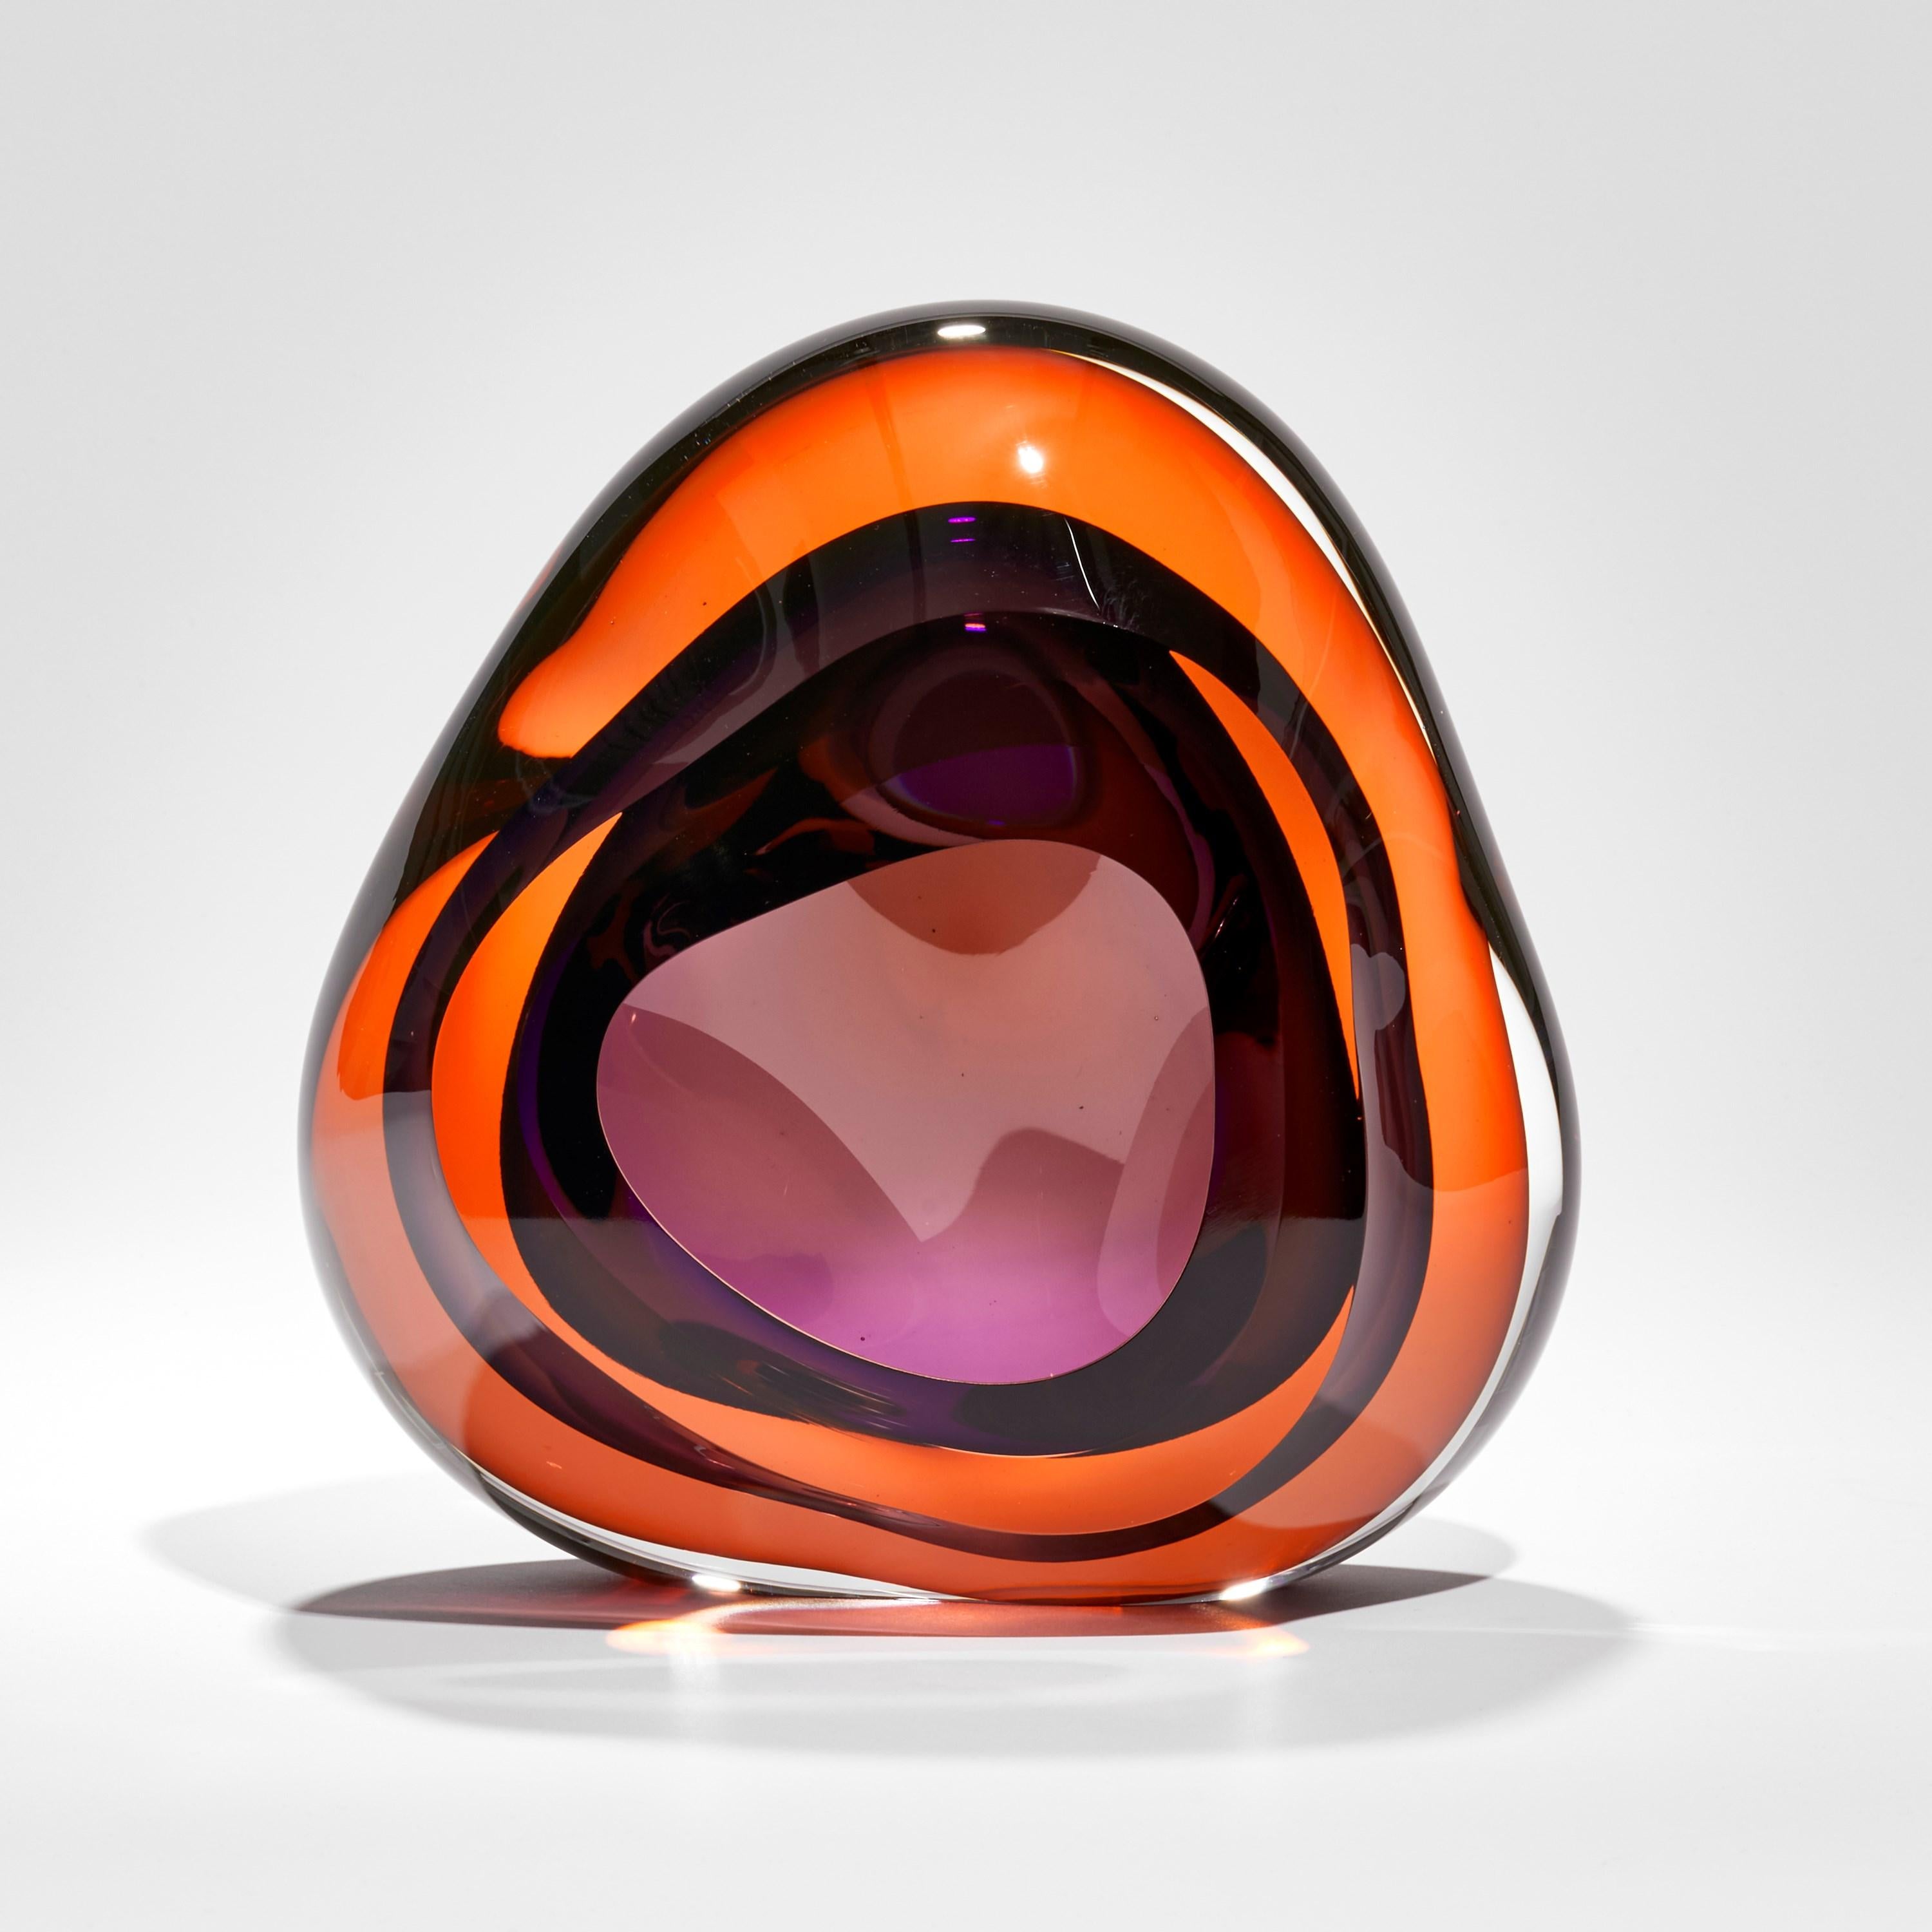 'Vug in Orange and Purple' is a unique handblown sculpture by the British artist, Samantha Donaldson. Created from layers of coloured glass in intense orange and rich purple, the transparent colours merge and create further hues throughout the